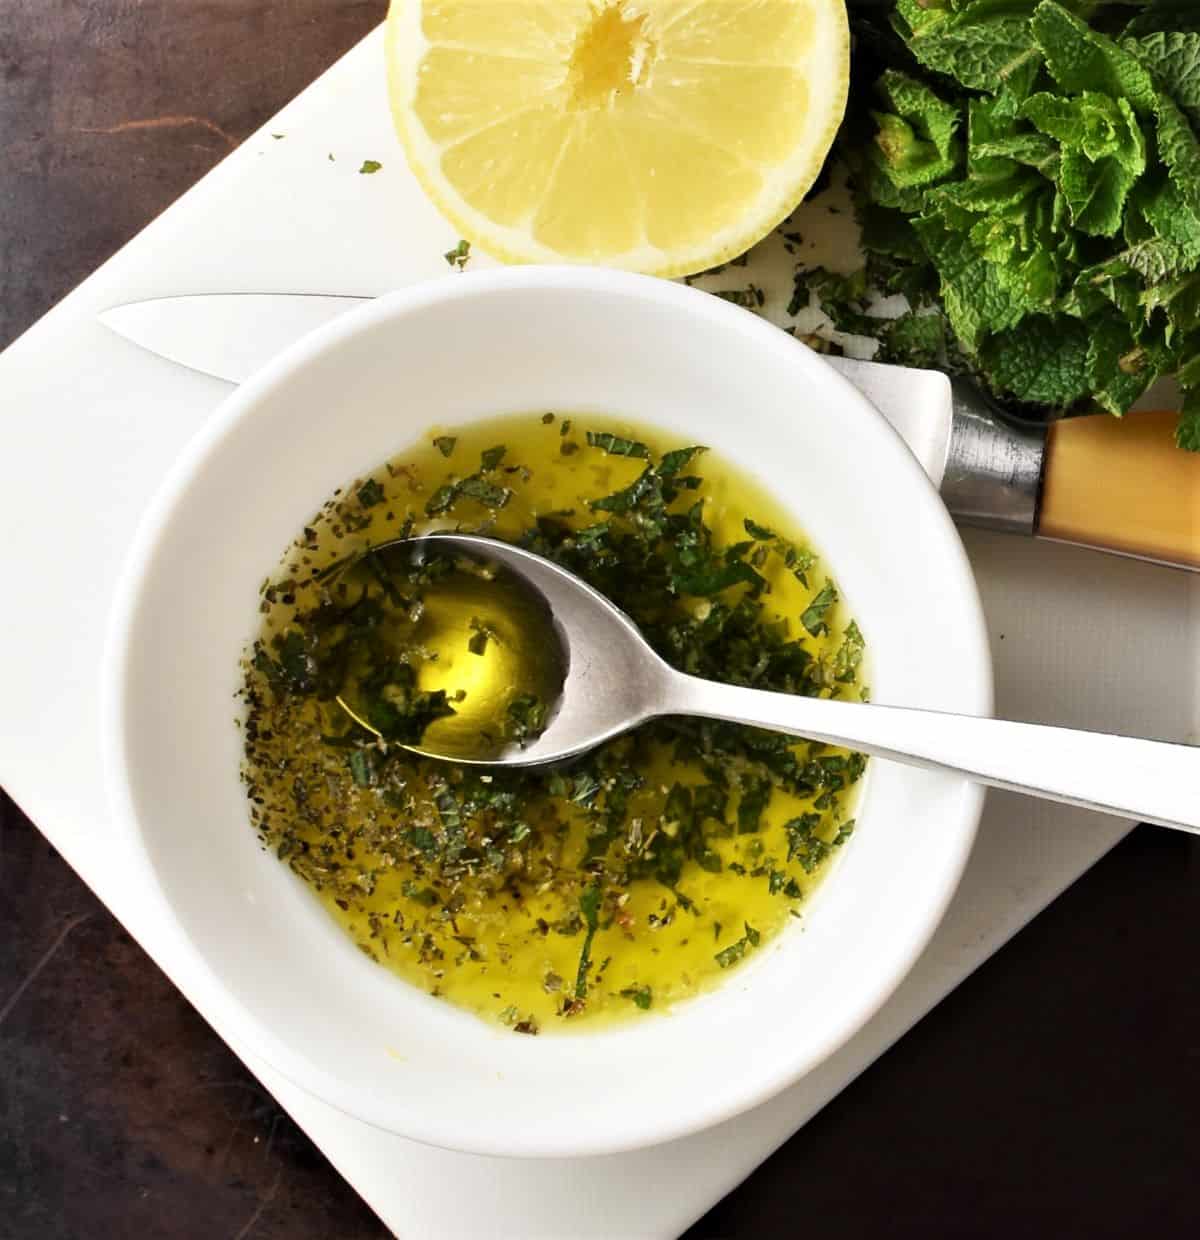 Salad dressing in white bowl with spoon, lemon and herbs.